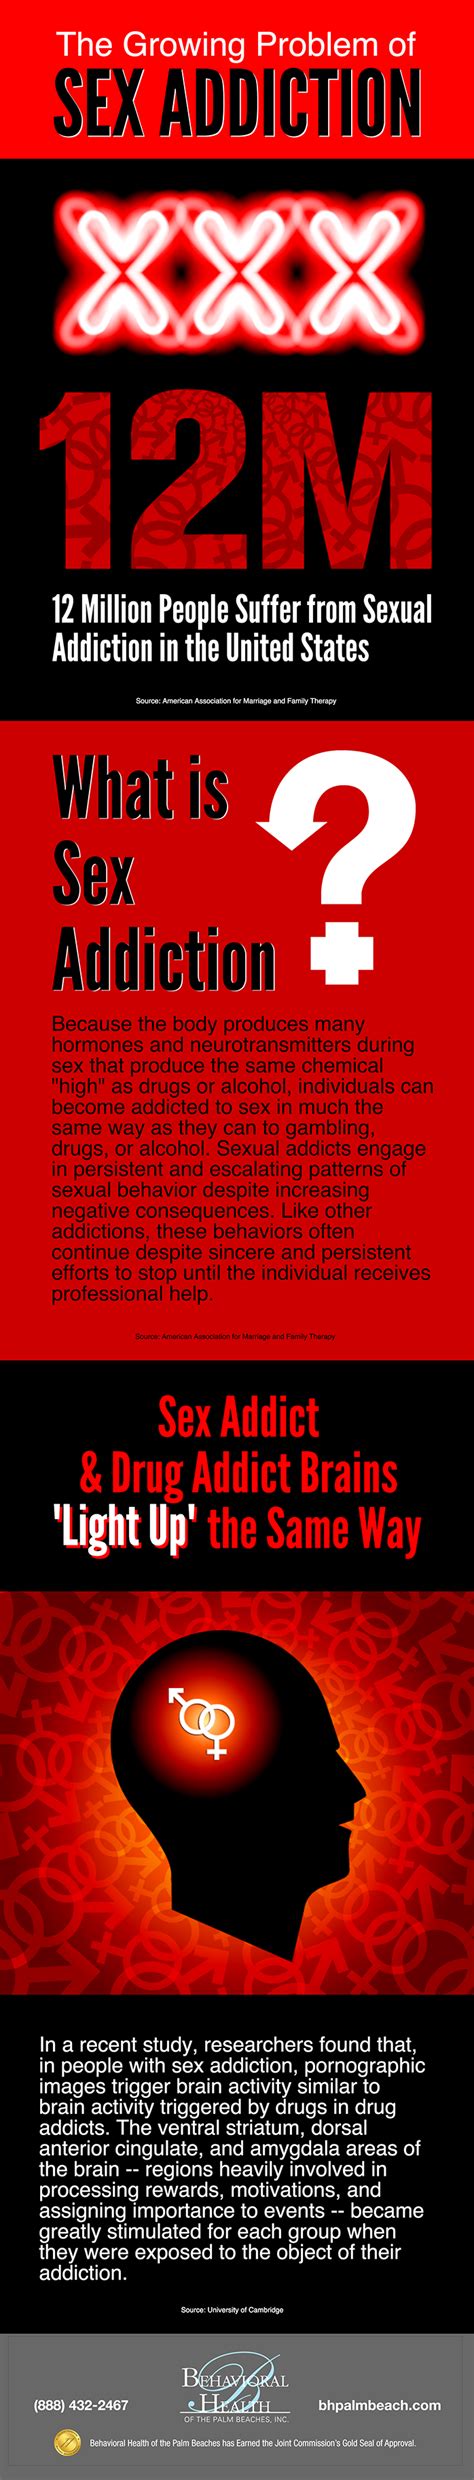 infographic the growing problem of sex addiction